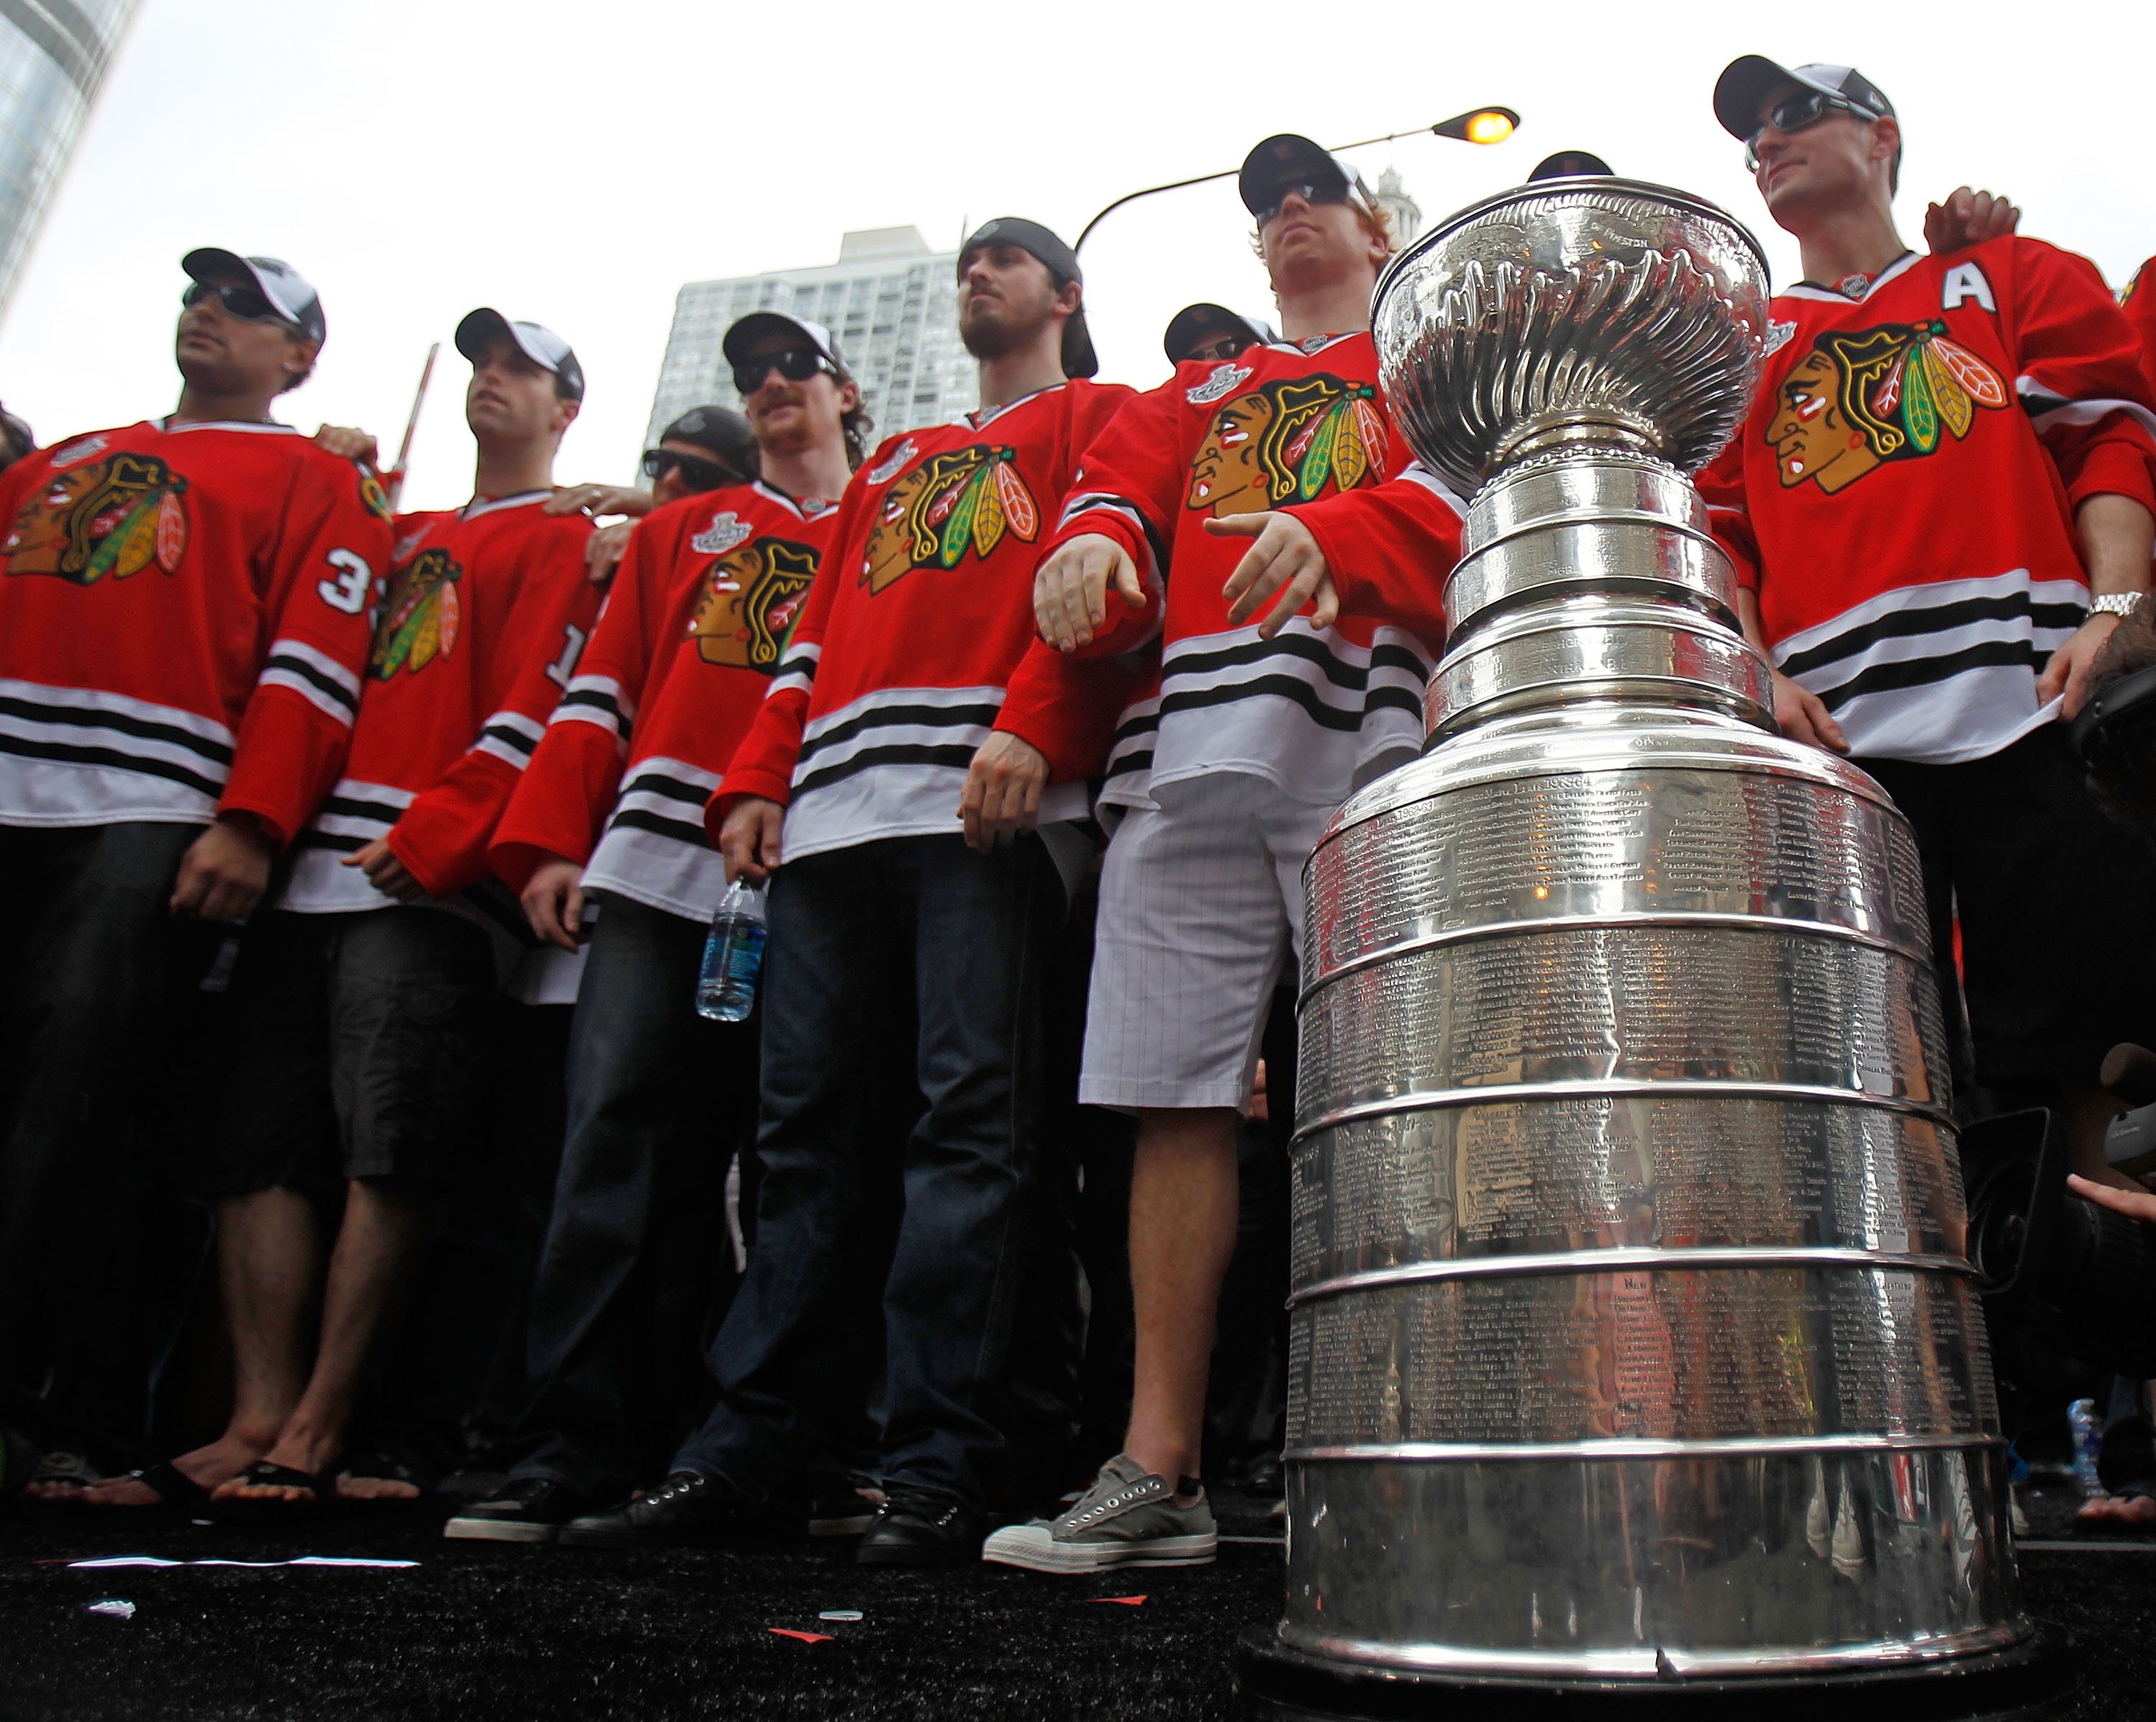 CHICAGO - JUNE 11: Members of the Chicago Blackhawks stand with the Stanley Cup during the Chicago Blackhawks Stanley Cup victory parade and rally on June 11, 2010 in Chicago, Illinois. (Photo by Jonathan Daniel/Getty Images)